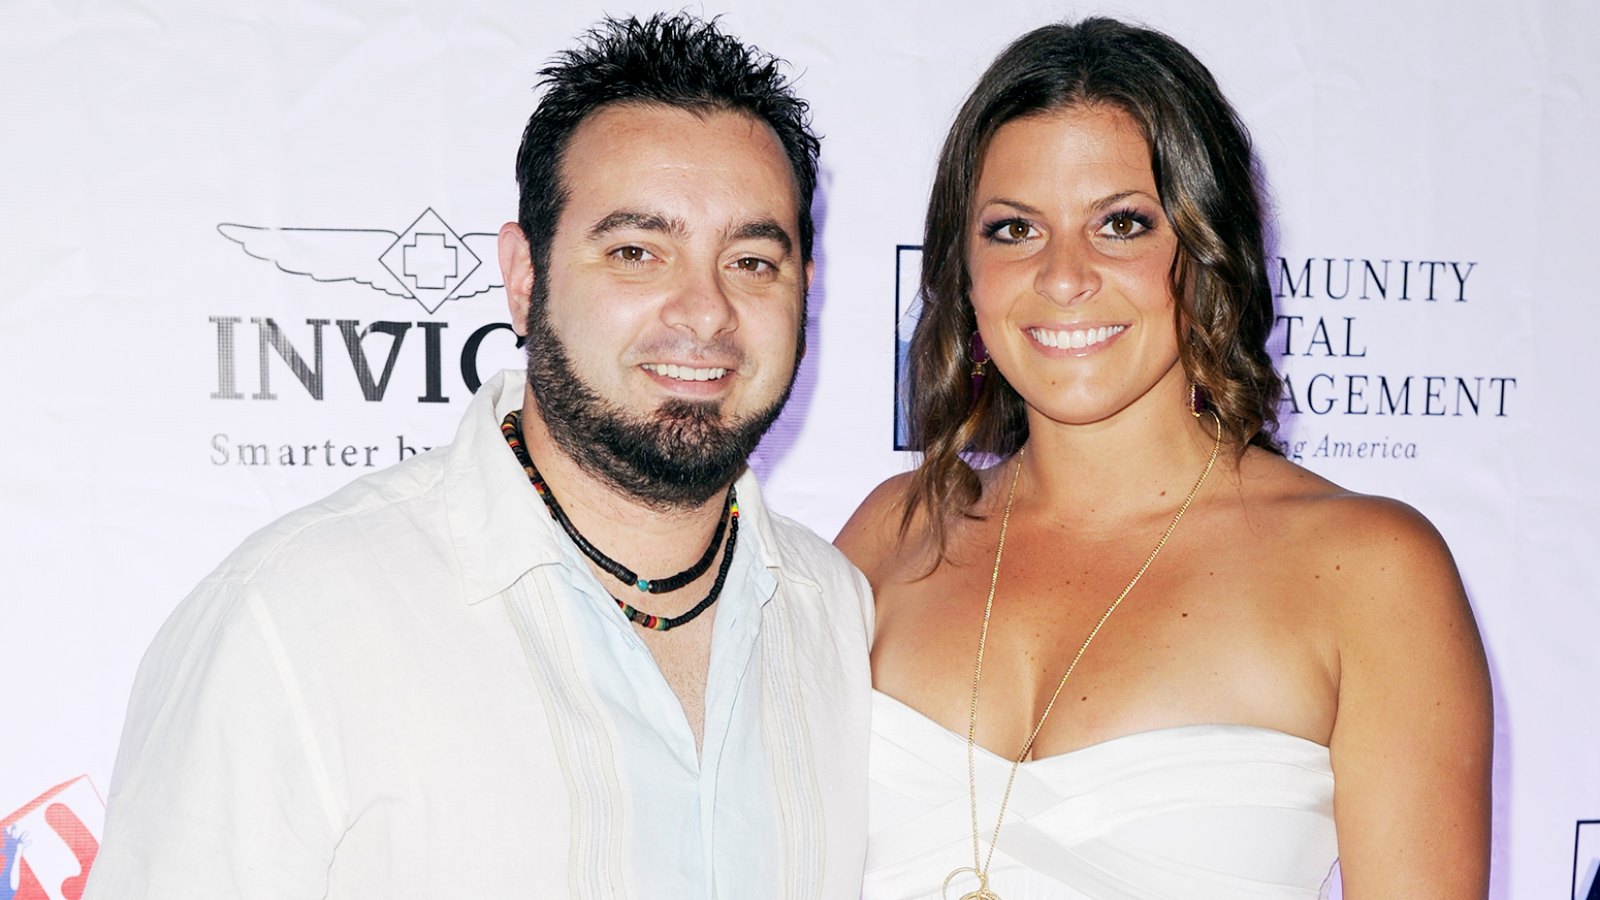 Chris Kirkpatrick and Karly Kirkpatrick arrive at 2013 Jason Taylor Celebrity Golf Classic white party at Seminole Hard Rock Hotel & Casino ? Hard Rock Cafe Hollywood on February 24, 2013 in Hollywood, Florida.